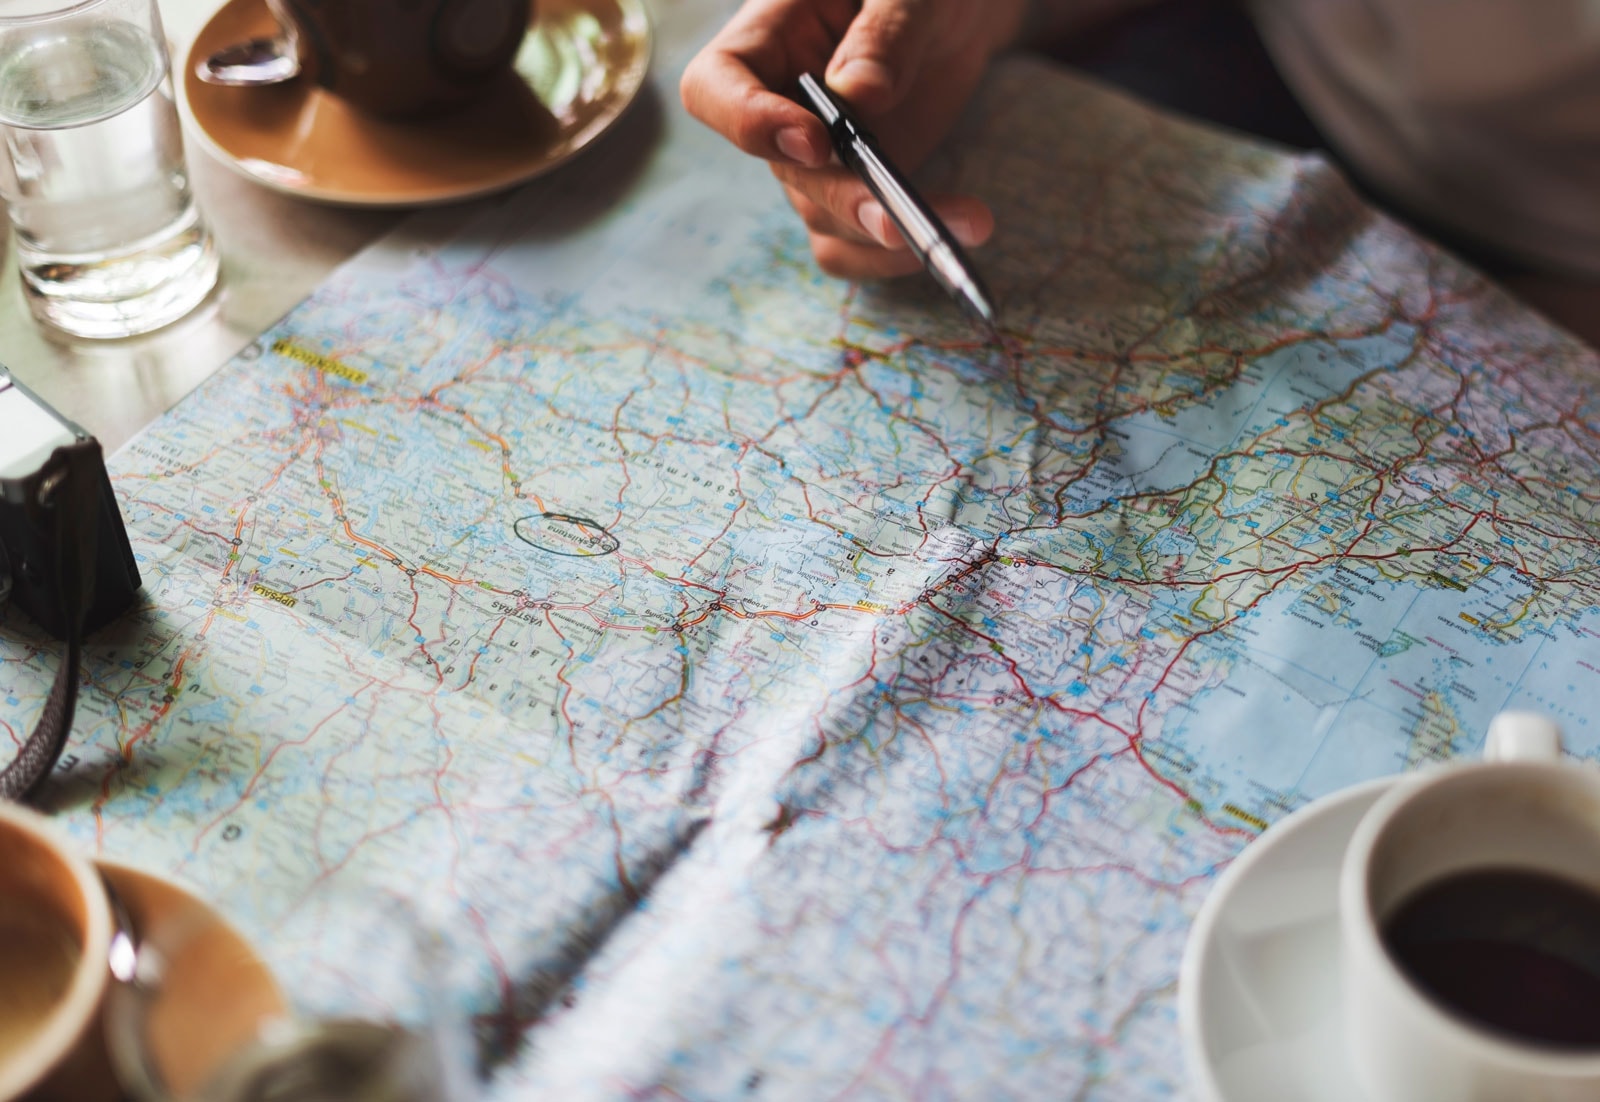 Planning the perfect trip